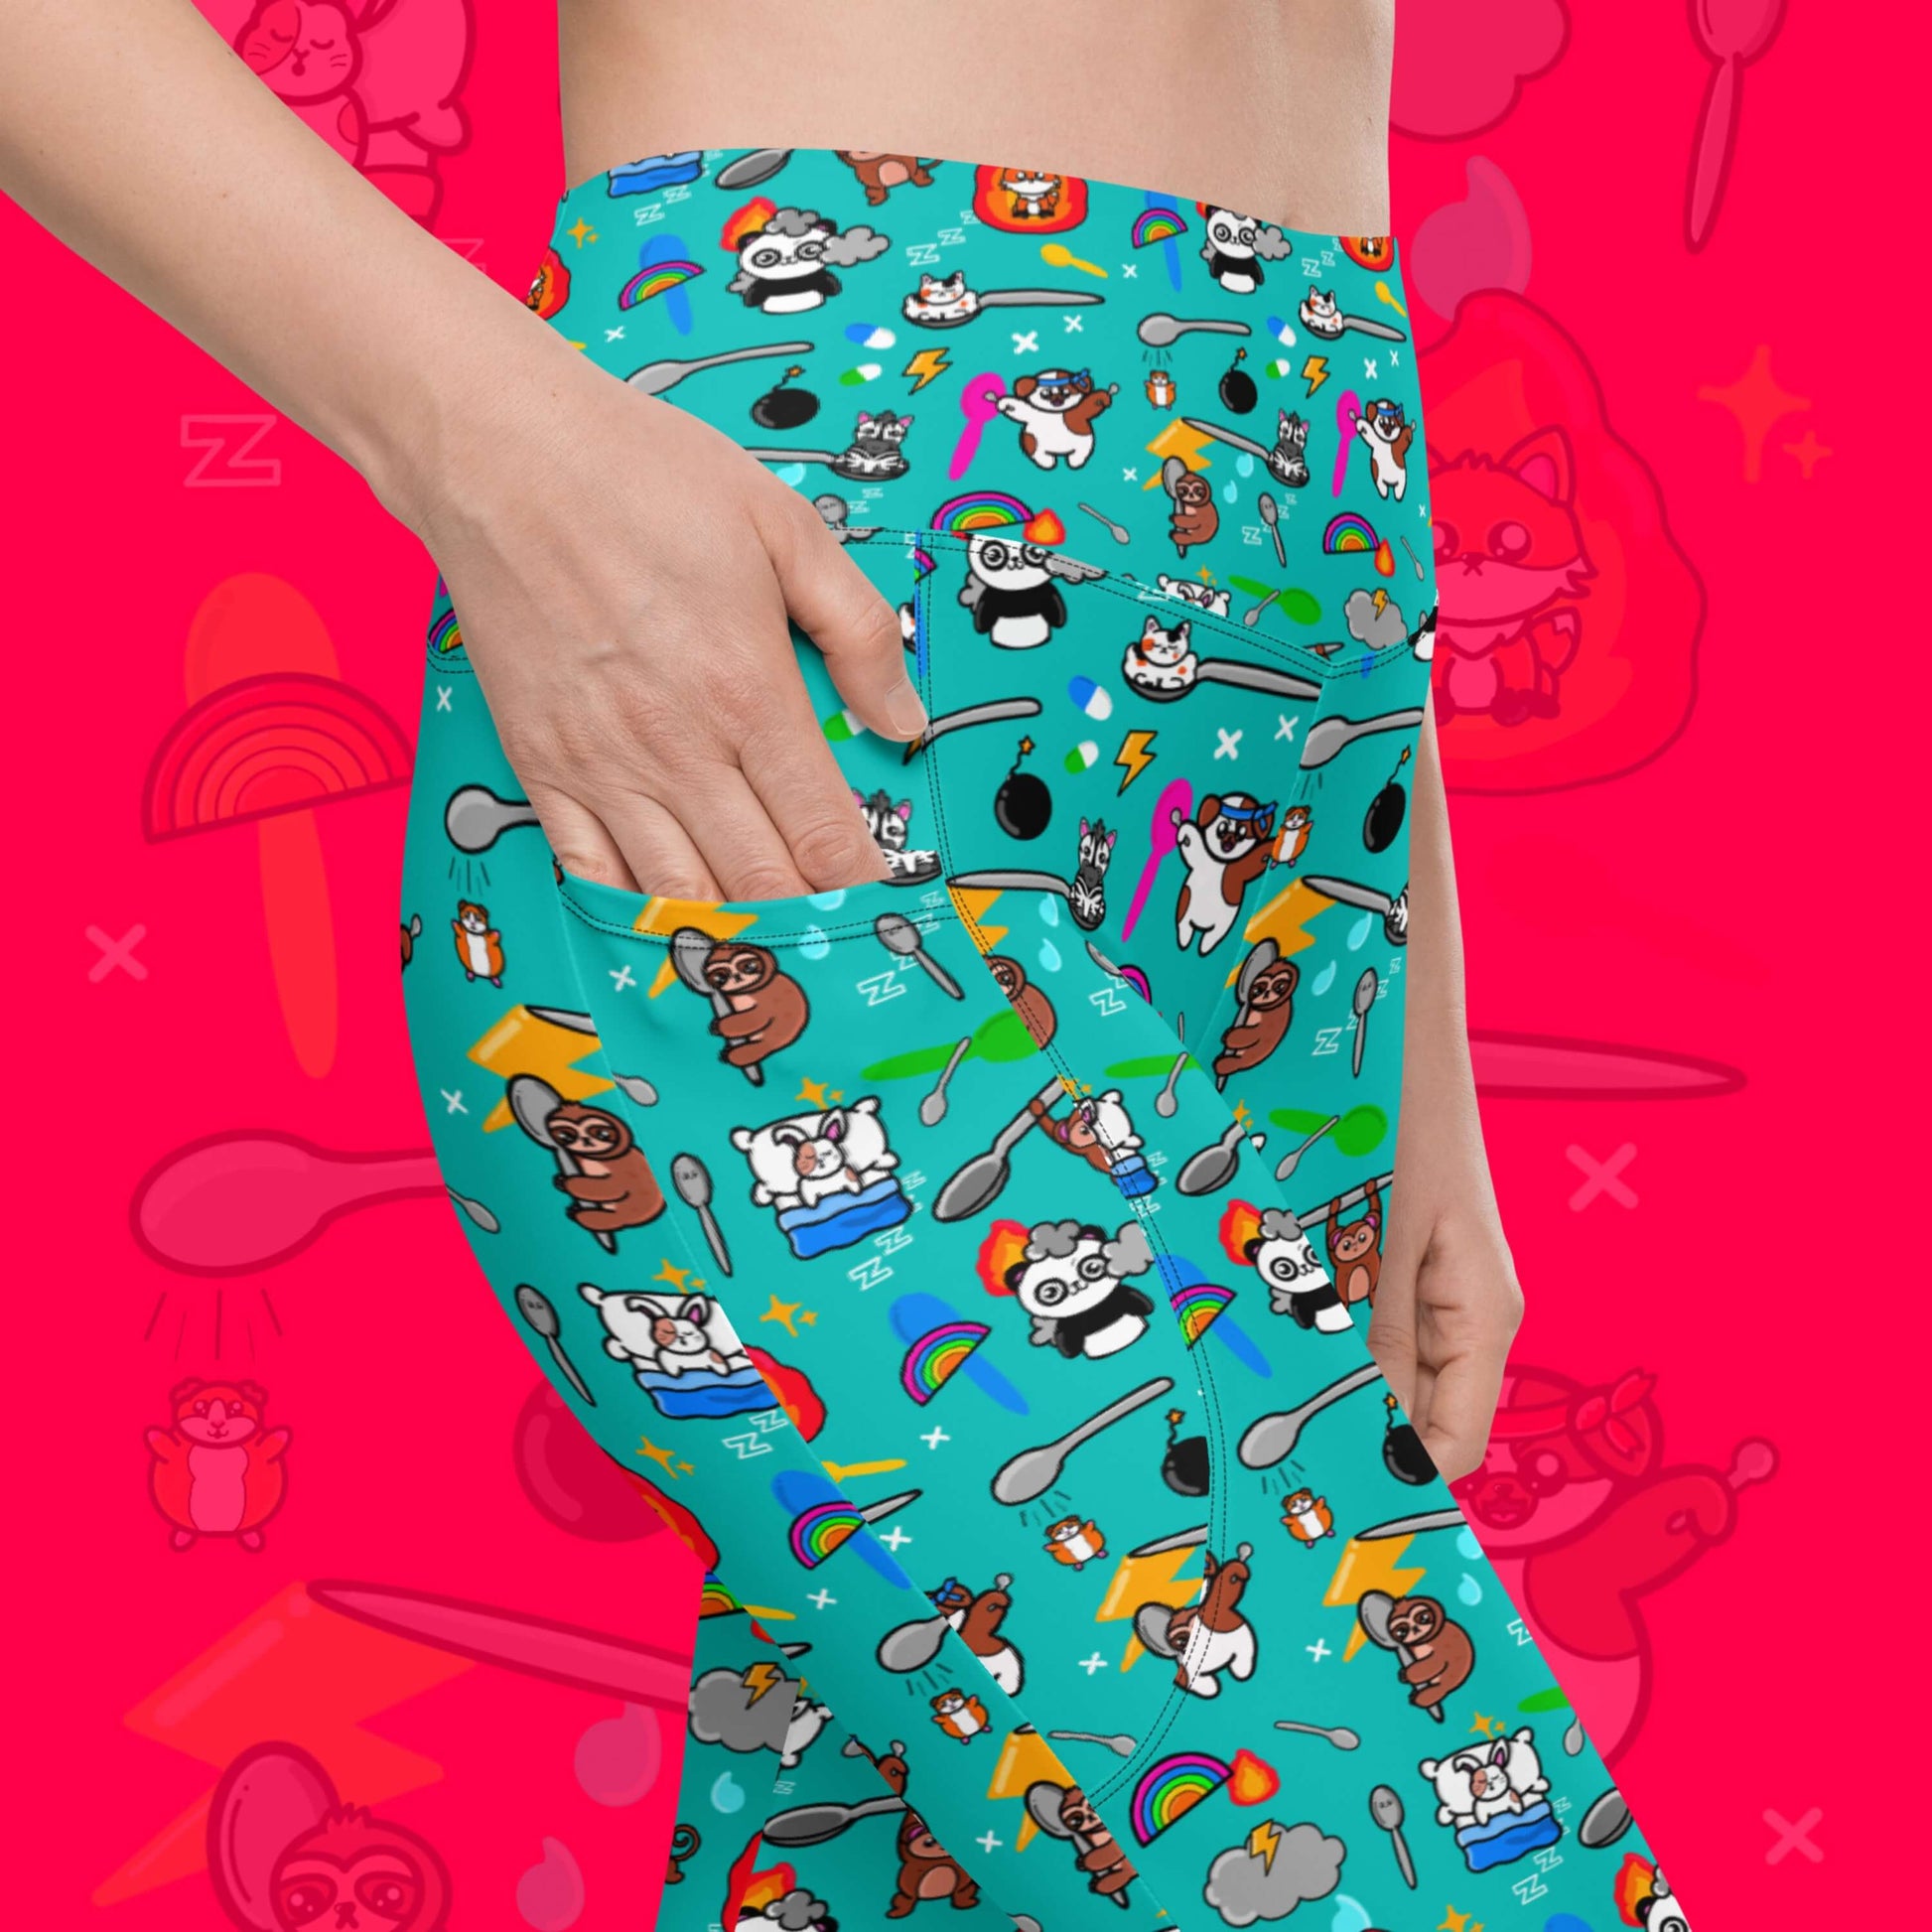 The Spoonie Leggings with Pockets modelled by a femme person putting their hand in the pocket on a red background with a faded version of the print in the background. The blue leggings feature various invisible illness themed animals, rainbows, spoons, sparkles, flames, pills and lightning bolts. Raising awareness for hidden disabilities.